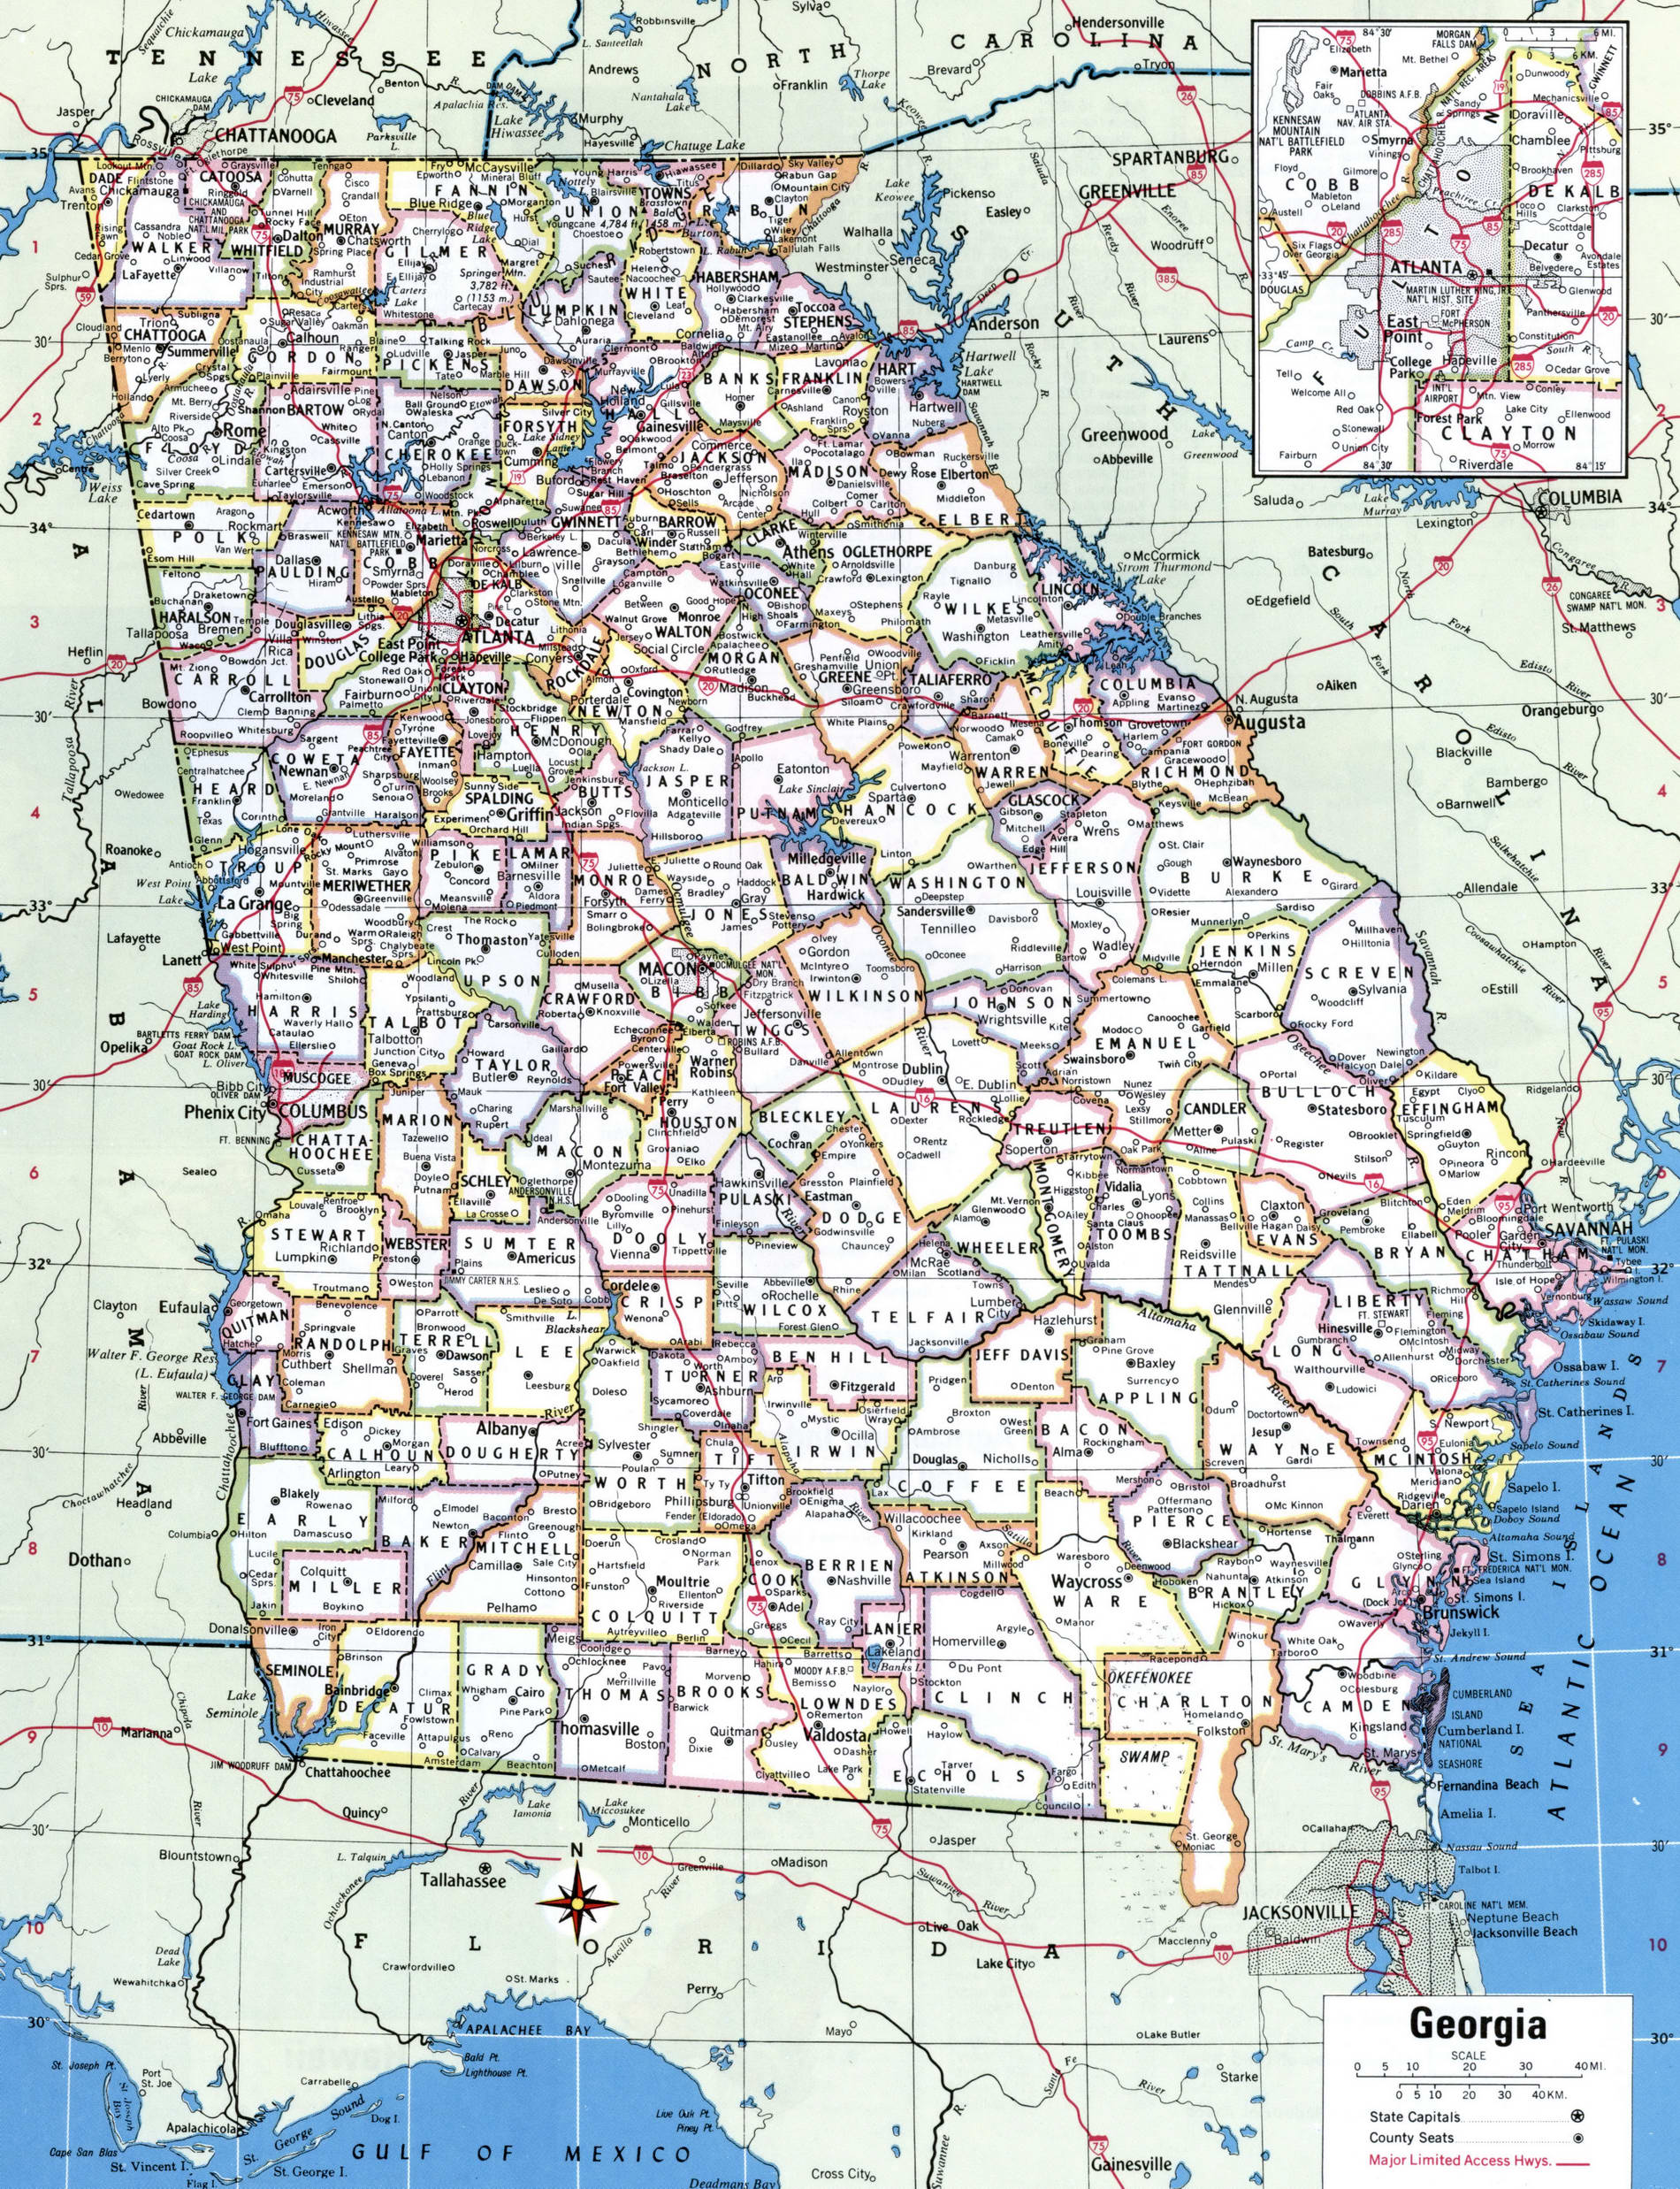 Map of Georgia showing county with cities,road highways,counties,towns